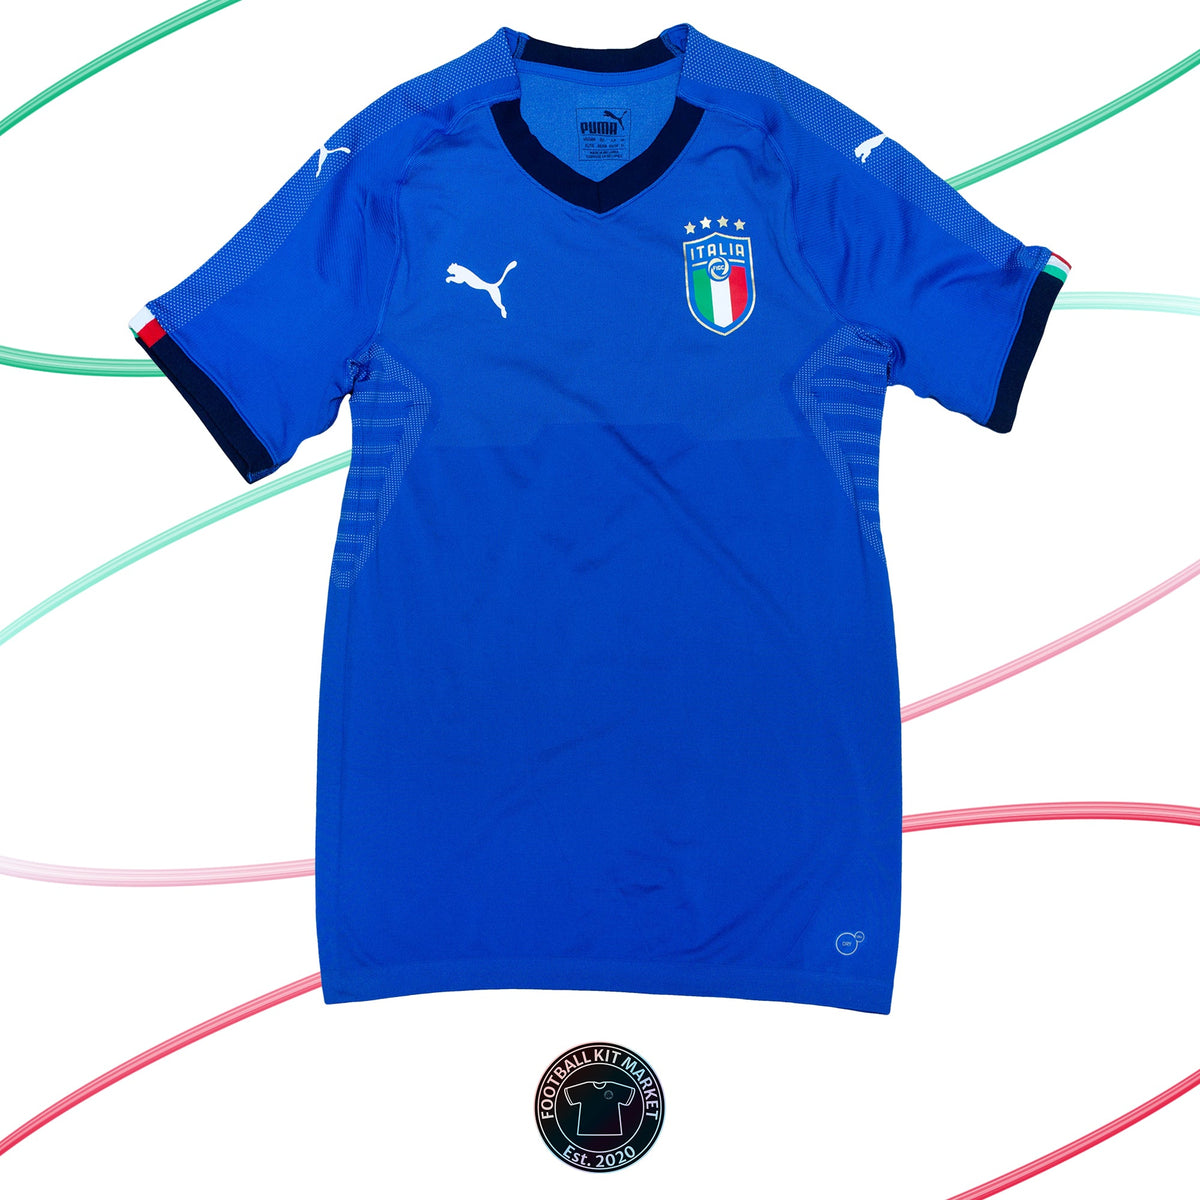 Genuine ITALY Home Shirt (2018-2019) - PUMA (XL) - Product Image from Football Kit Market